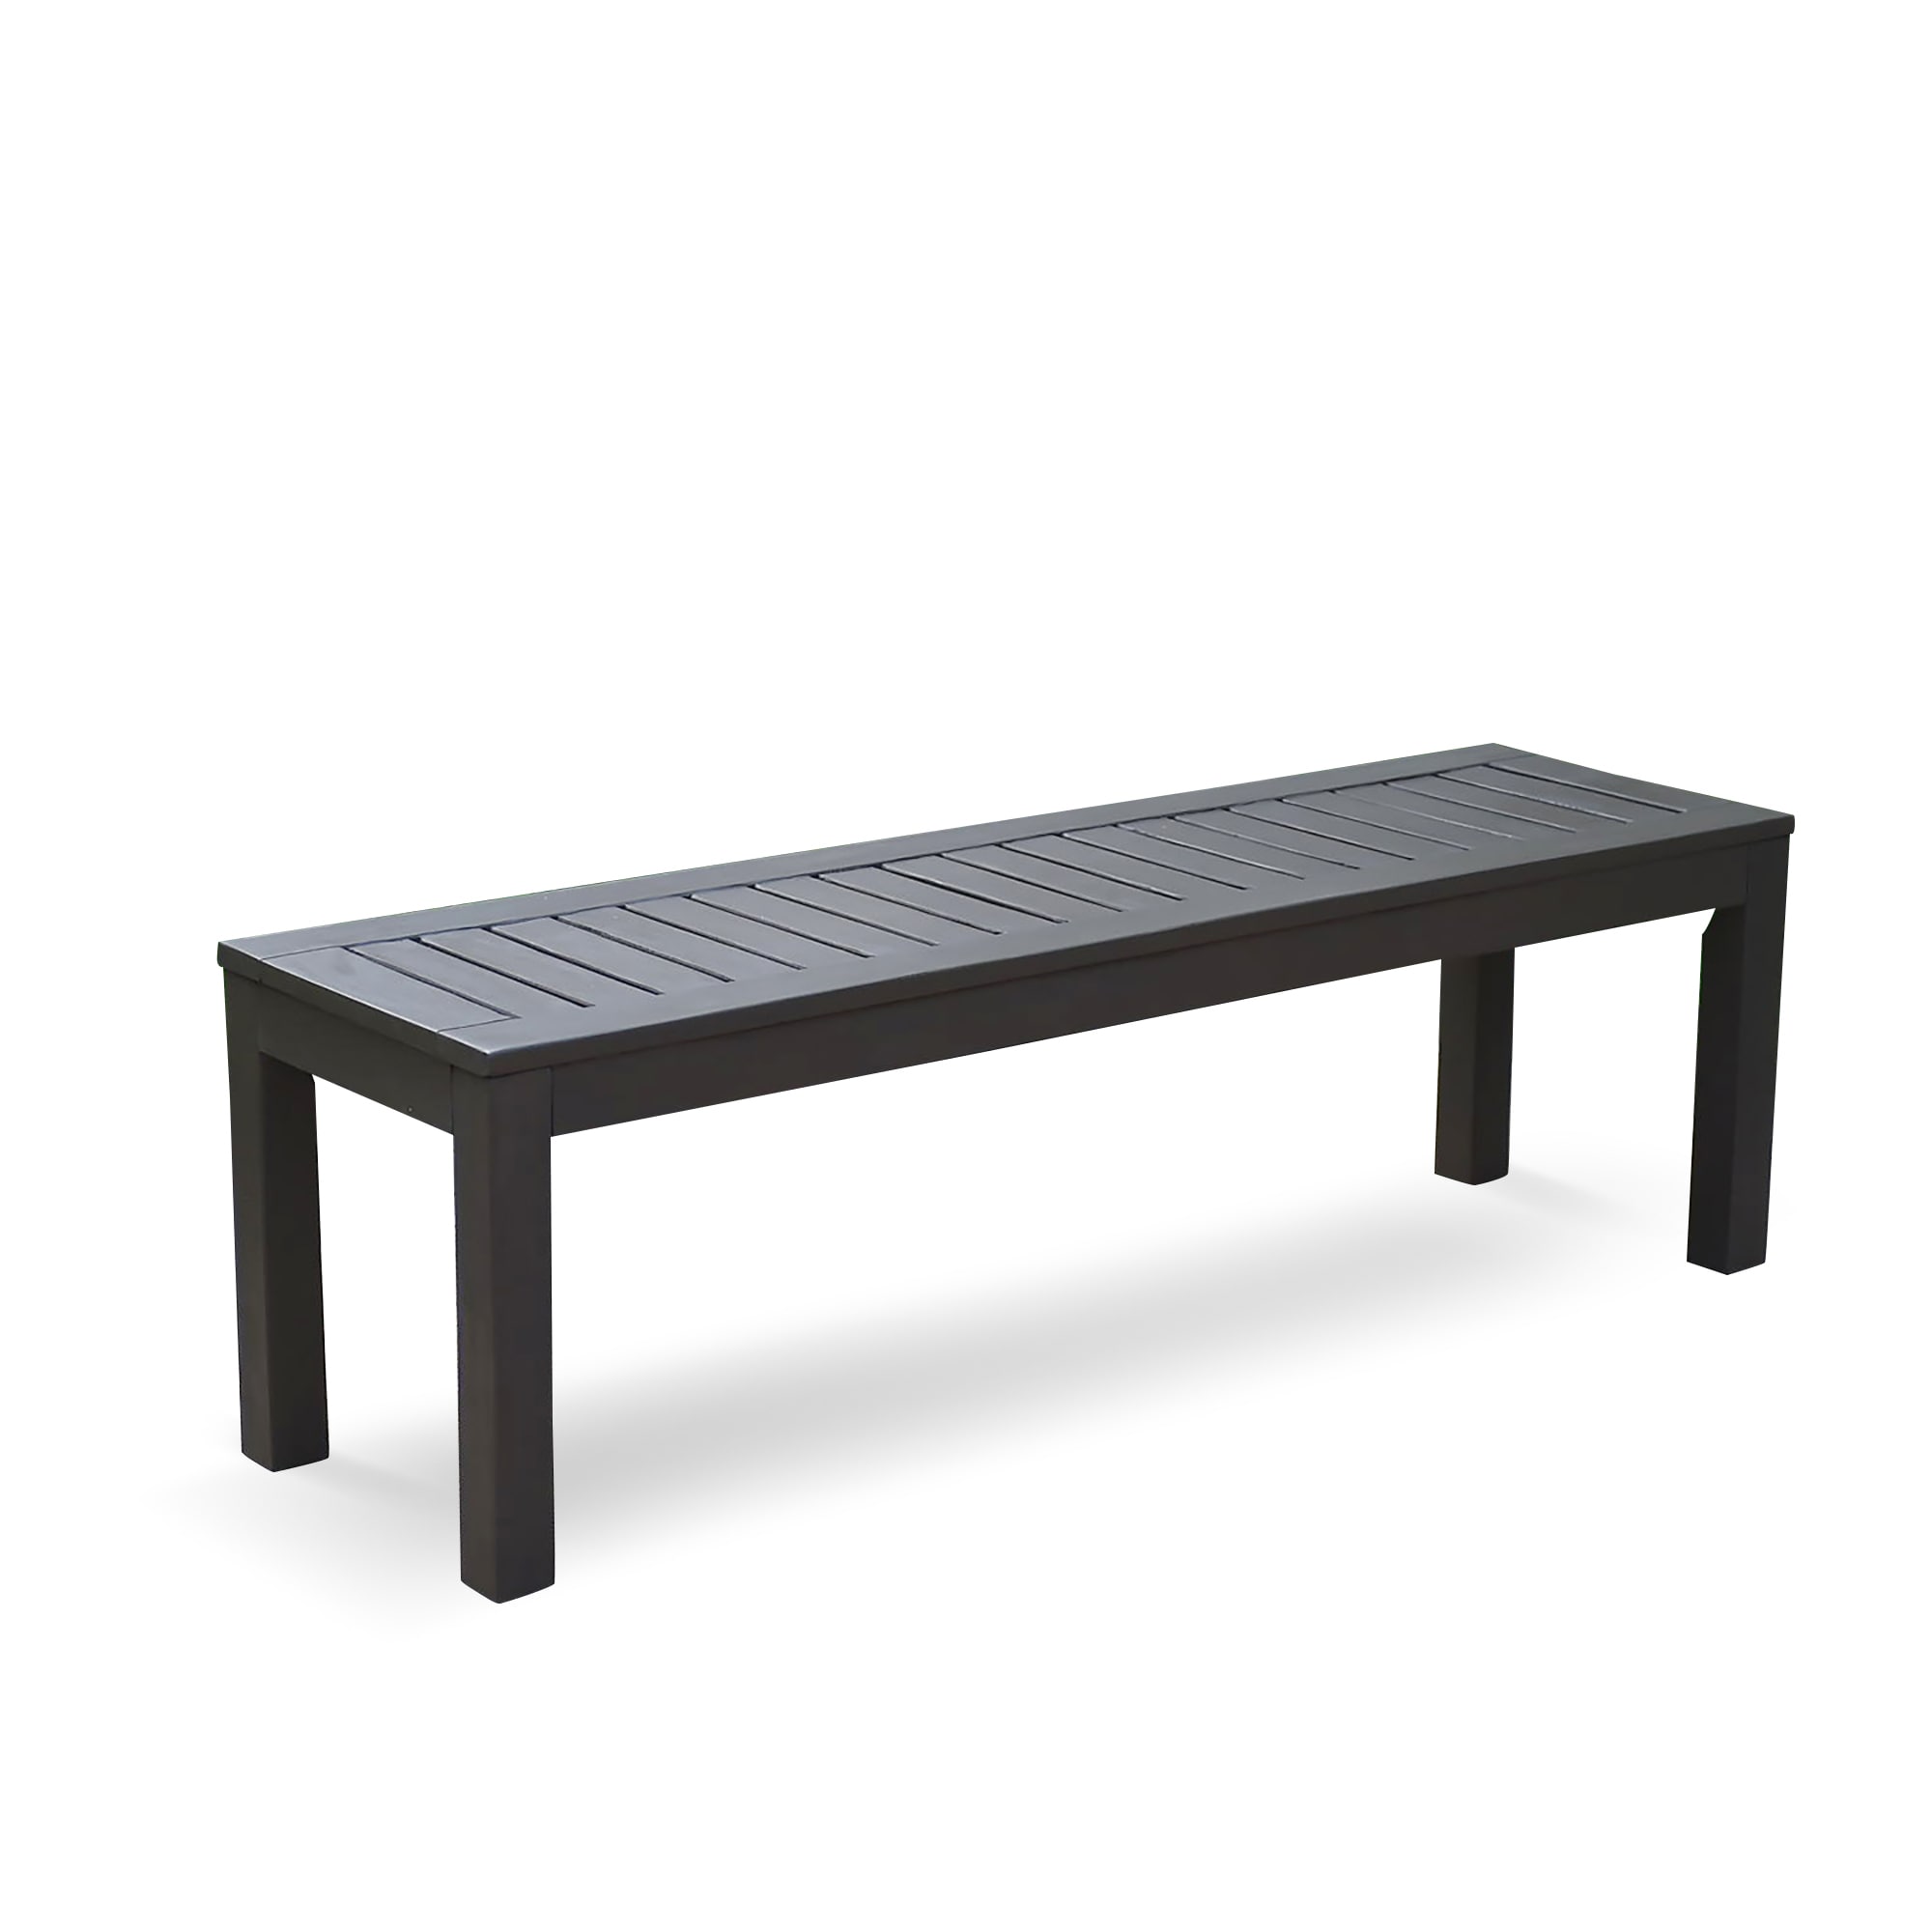 at department Benches Patio Dark Dining Bench Braga 55-in W the 17-in Cambridge Gray Casual x H in